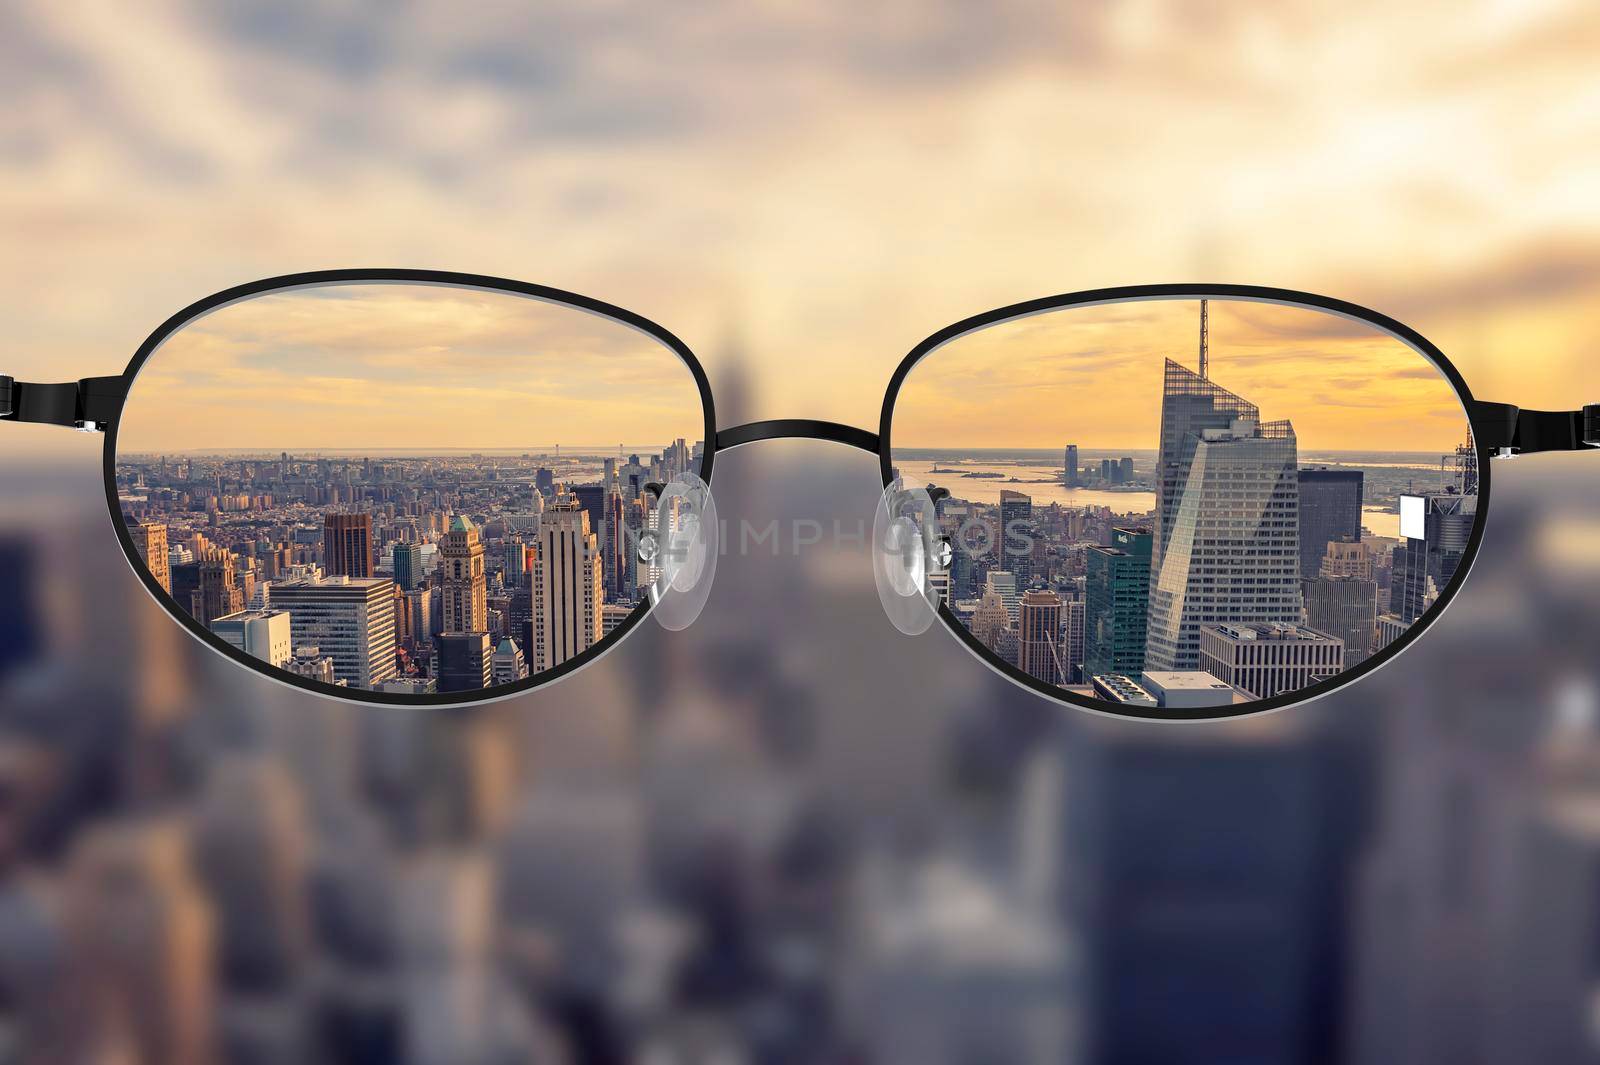 Clear cityscape focused in glasses lenses with blurred cityscape background